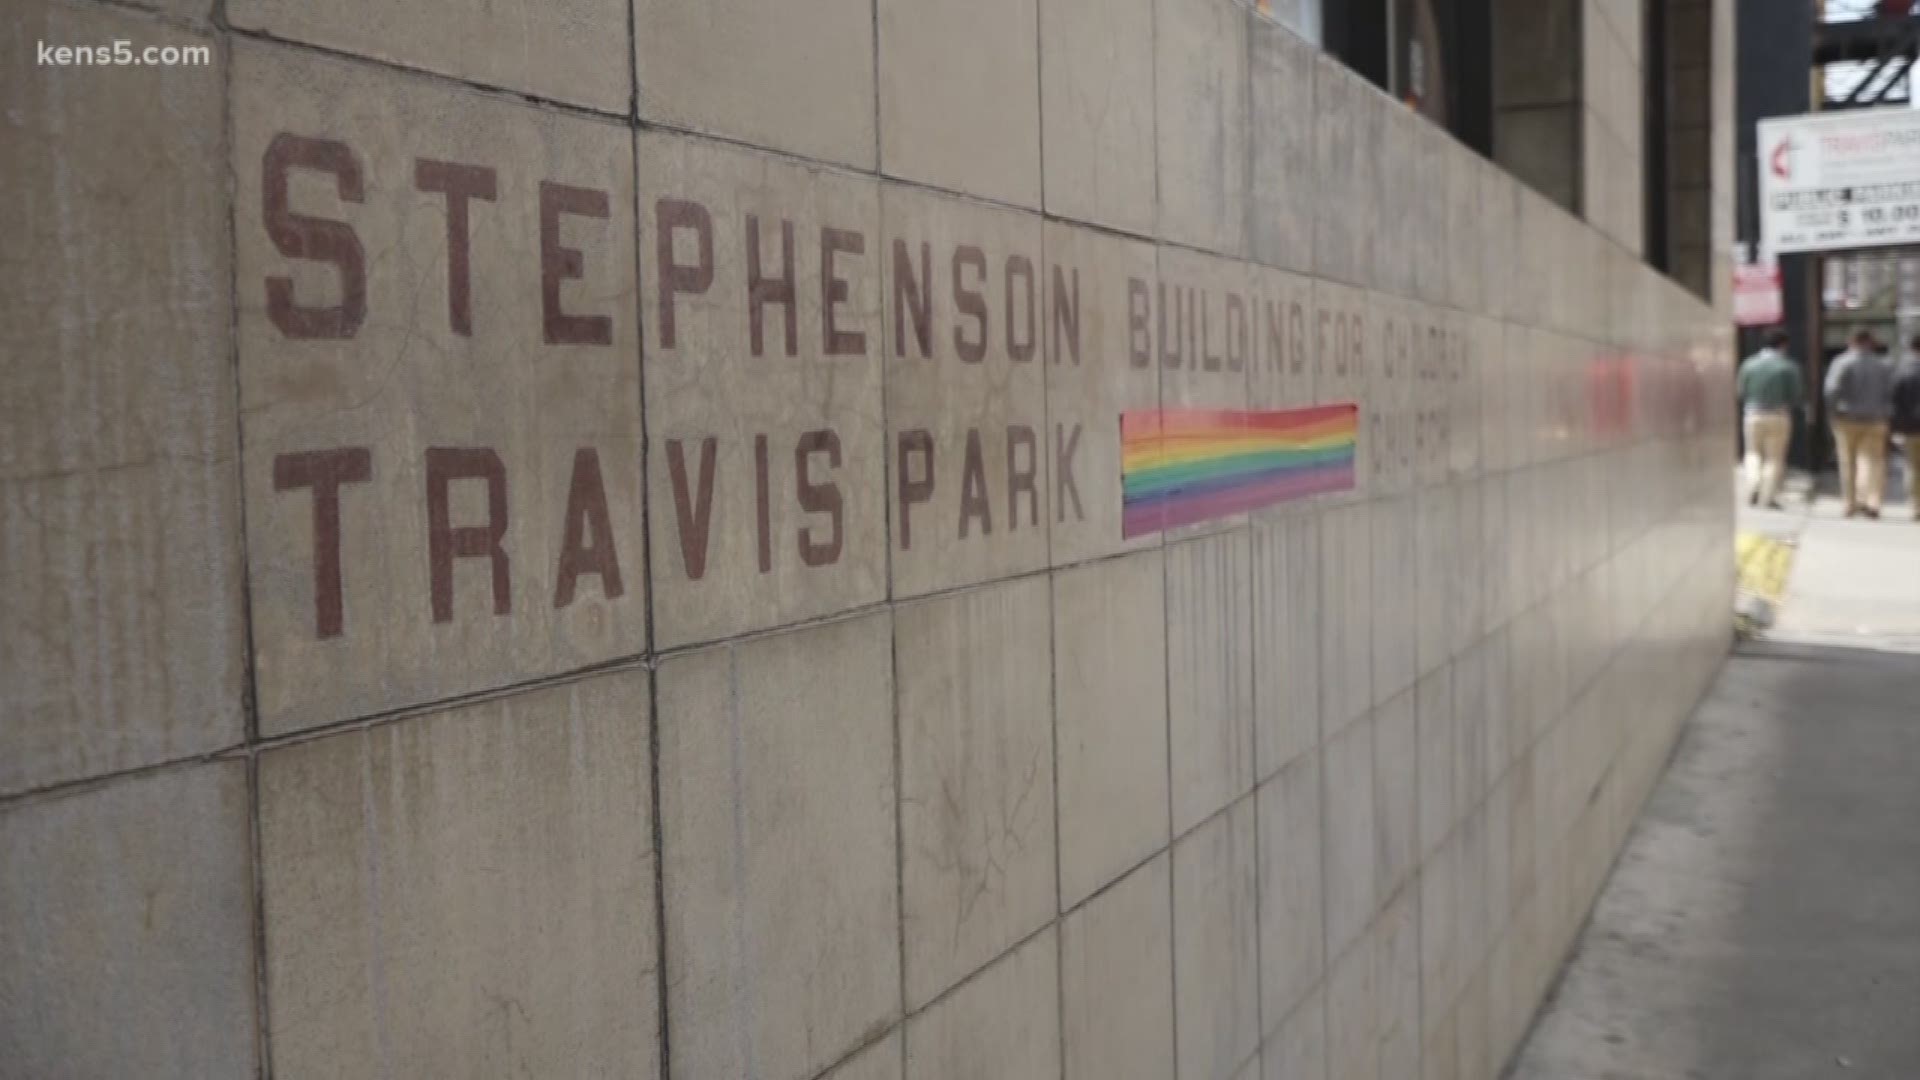 After United Methodist Church recently voted against supporting gay marriage or having gay clergy members, the downtown San Antonio Travis Park Church is carving its own path.